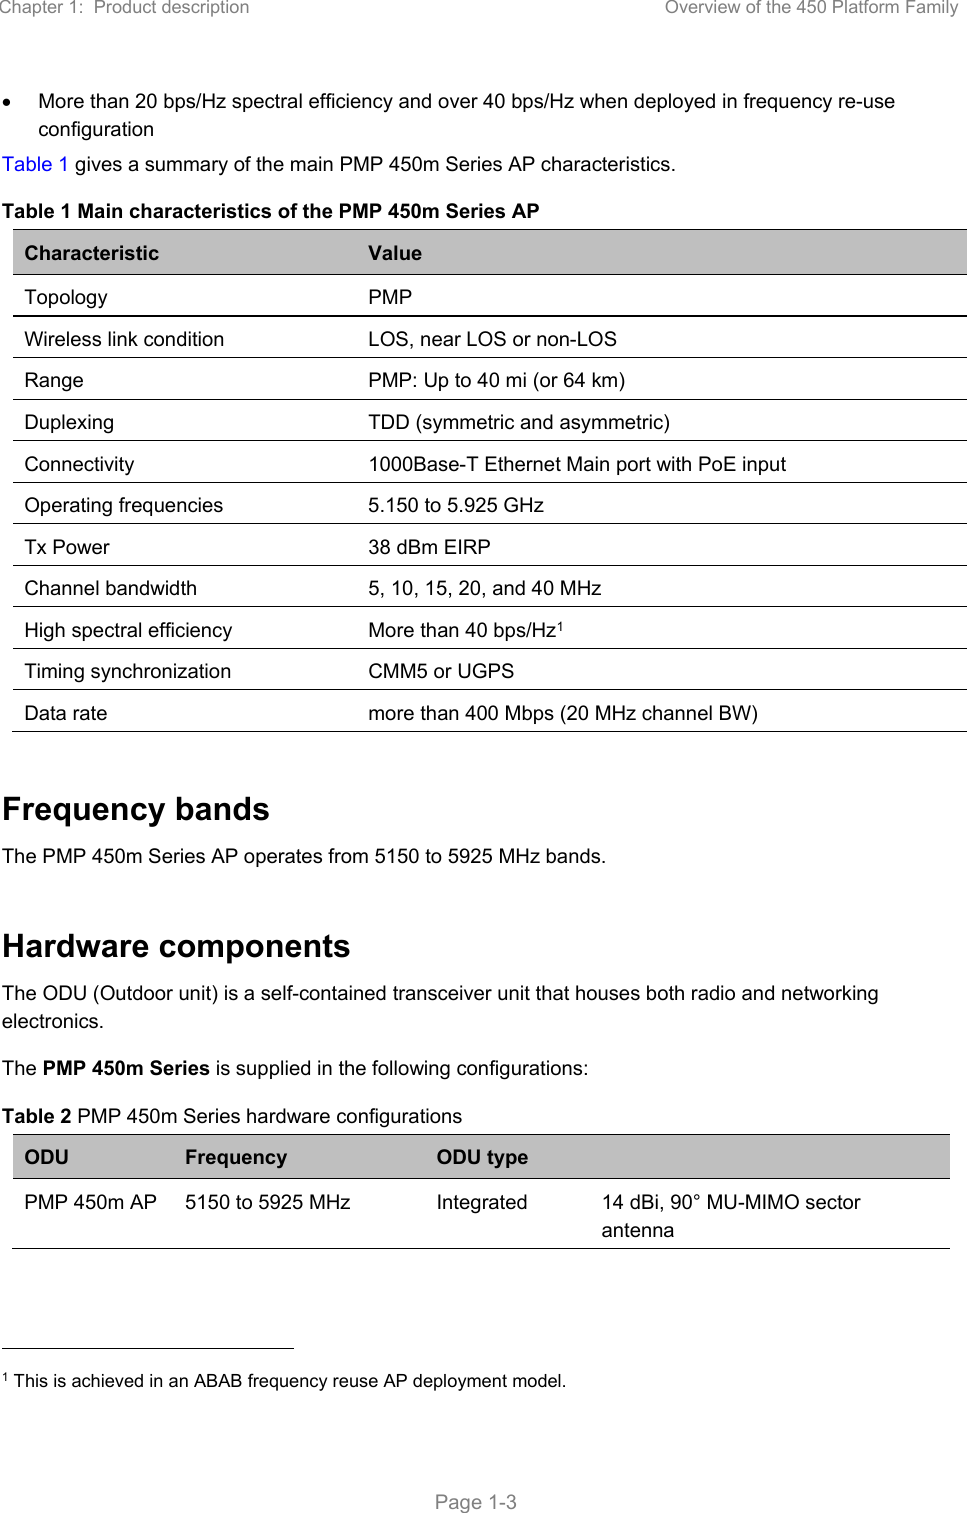 Chapter 1:  Product description  Overview of the 450 Platform Family   Page 1-3   More than 20 bps/Hz spectral efficiency and over 40 bps/Hz when deployed in frequency re-use configuration Table 1 gives a summary of the main PMP 450m Series AP characteristics. Table 1 Main characteristics of the PMP 450m Series AP Characteristic  Value Topology  PMP Wireless link condition  LOS, near LOS or non-LOS Range  PMP: Up to 40 mi (or 64 km) Duplexing  TDD (symmetric and asymmetric) Connectivity  1000Base-T Ethernet Main port with PoE input Operating frequencies  5.150 to 5.925 GHz Tx Power  38 dBm EIRP Channel bandwidth  5, 10, 15, 20, and 40 MHz High spectral efficiency  More than 40 bps/Hz1 Timing synchronization  CMM5 or UGPS Data rate  more than 400 Mbps (20 MHz channel BW)  Frequency bands The PMP 450m Series AP operates from 5150 to 5925 MHz bands.  Hardware components The ODU (Outdoor unit) is a self-contained transceiver unit that houses both radio and networking electronics.  The PMP 450m Series is supplied in the following configurations: Table 2 PMP 450m Series hardware configurations ODU  Frequency  ODU type   PMP 450m AP  5150 to 5925 MHz  Integrated  14 dBi, 90° MU-MIMO sector antenna                                                             1 This is achieved in an ABAB frequency reuse AP deployment model. 